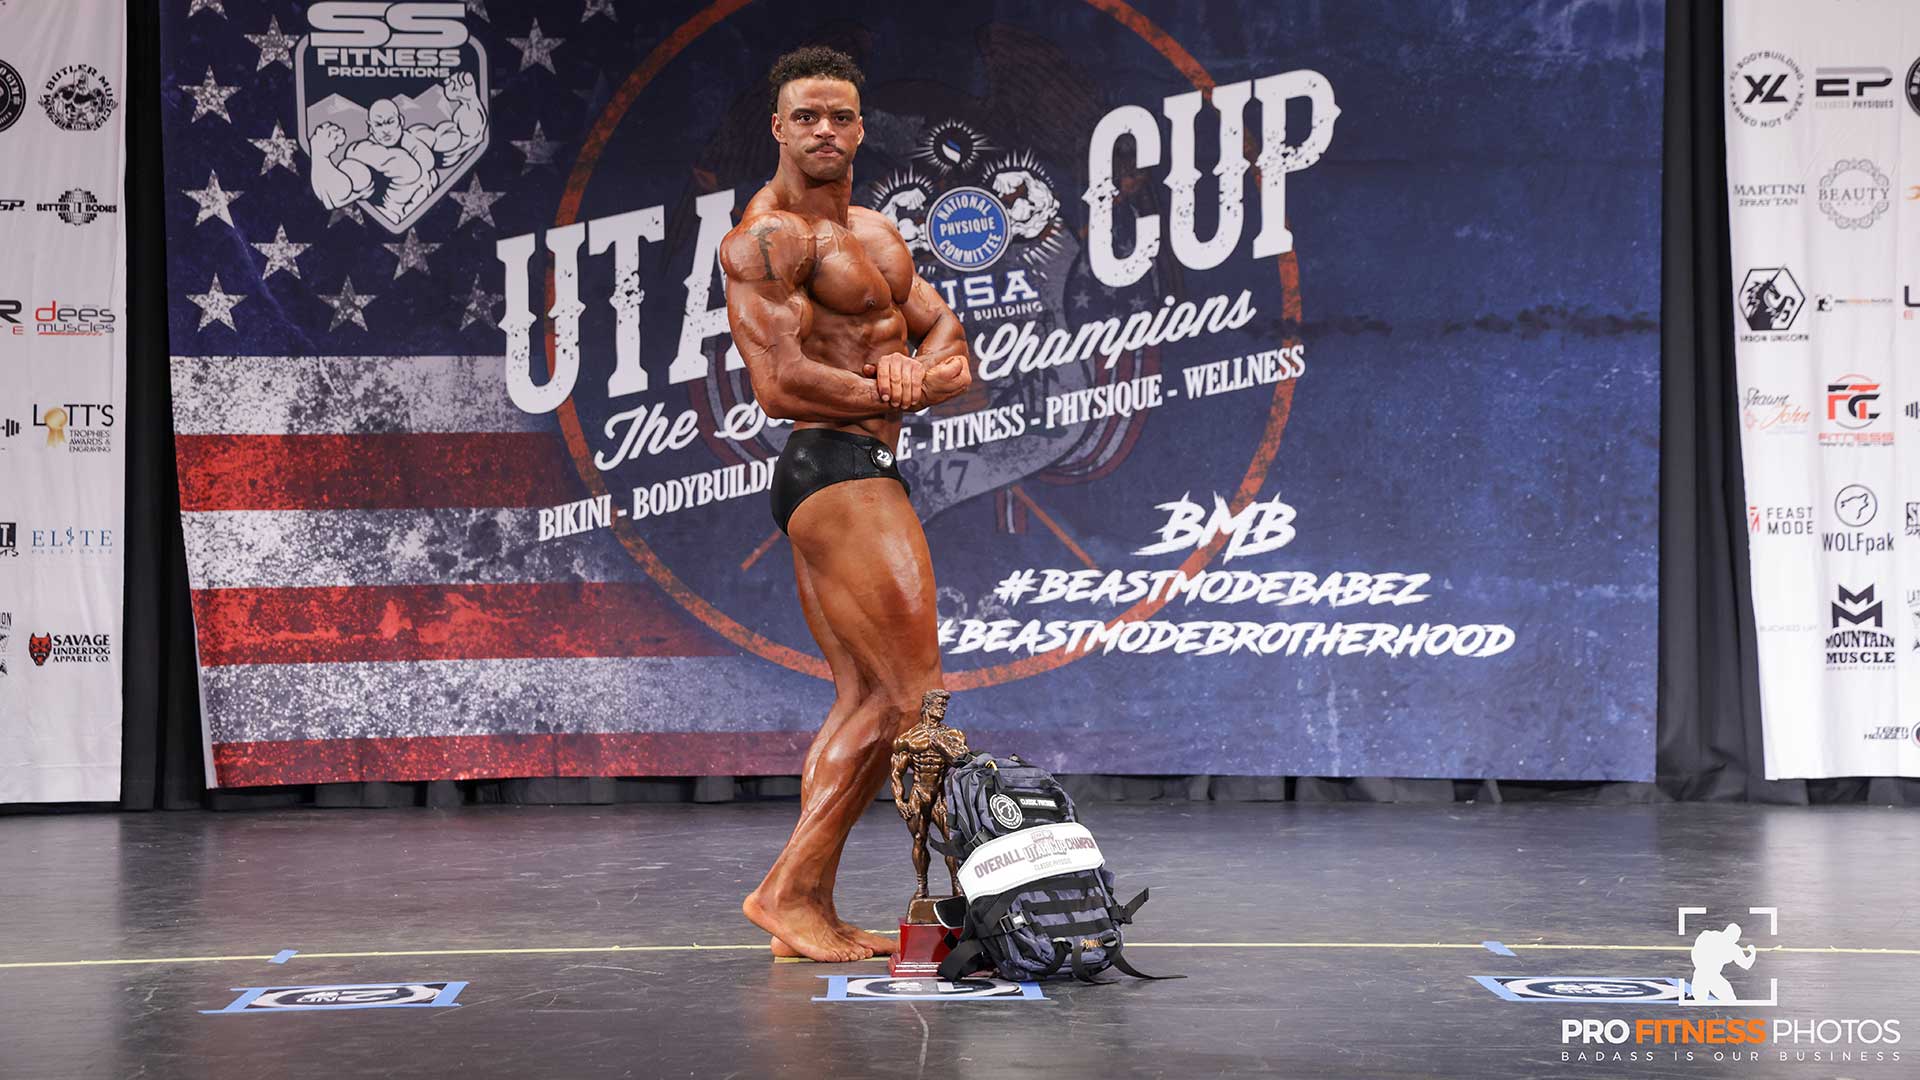 NPC Bodybuilding, Physique, Bikini, Figure, Wellness and Fitness  Championships In Utah - SS Fitness Productions - Bodybuilding, Fitness,  Figure, Bikini and Physique Competitions